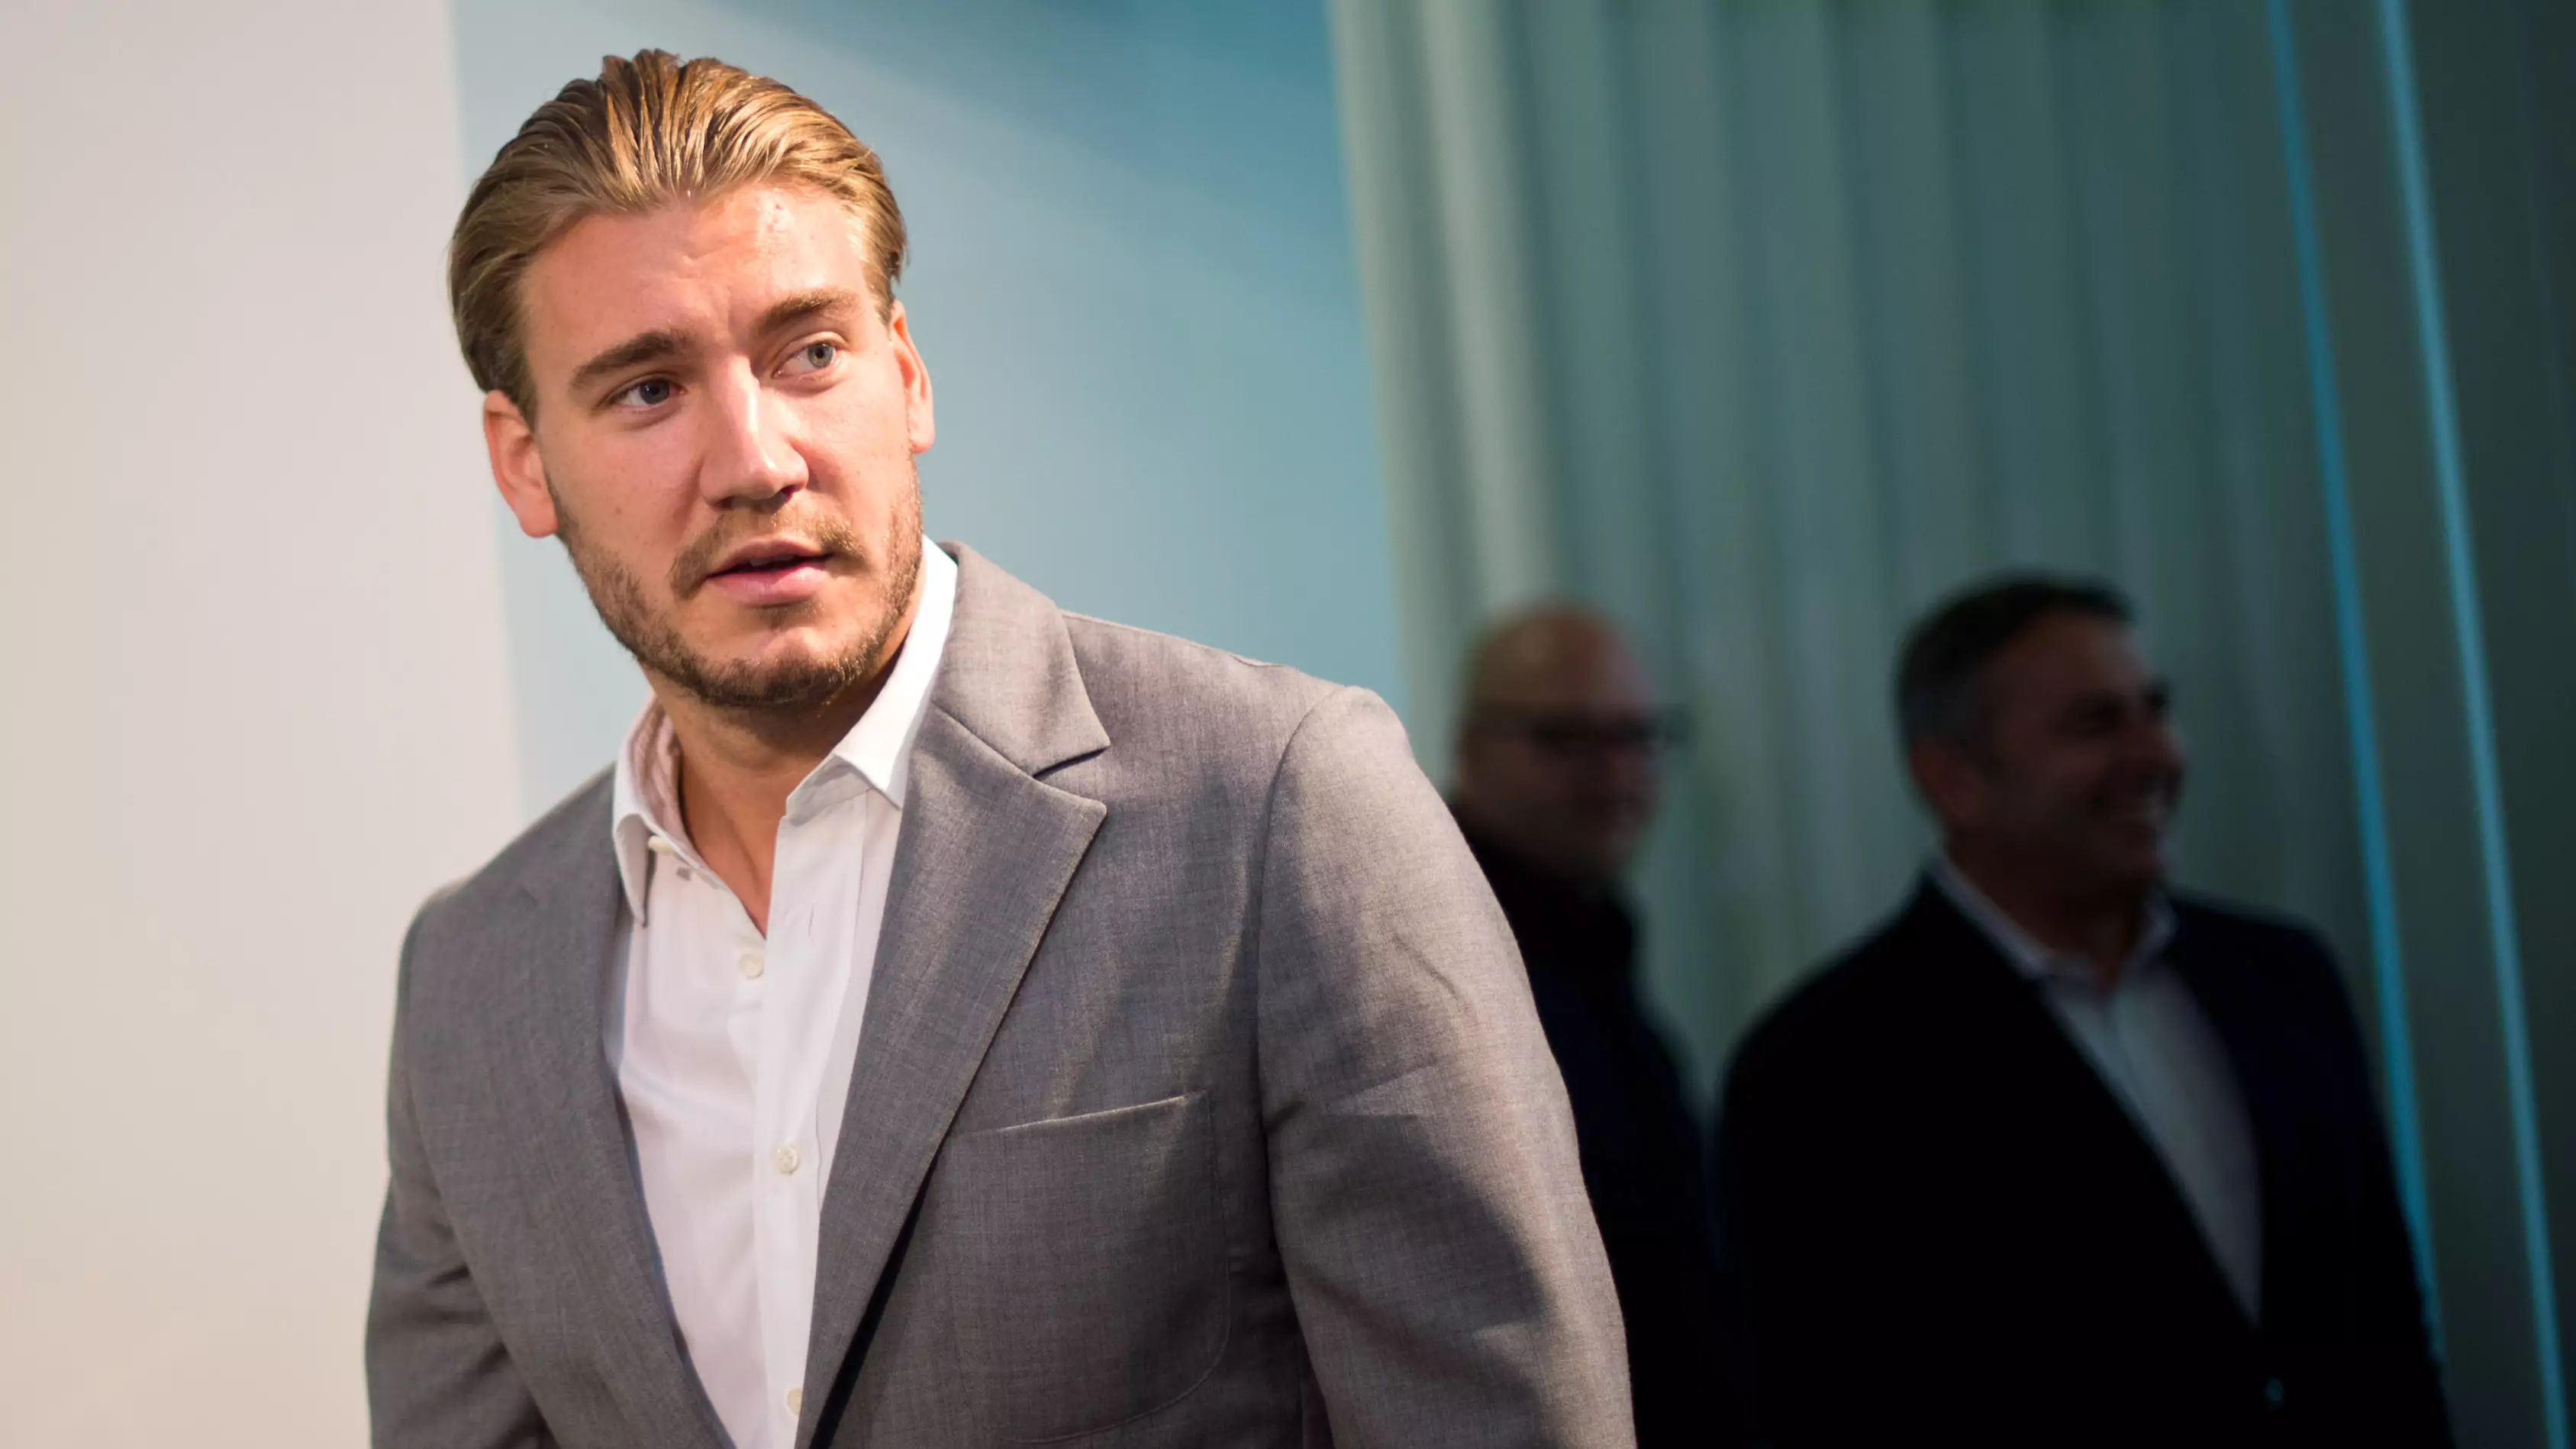 Nicklas Bendtner Produced An Incredible Post-Match Interview Last Night